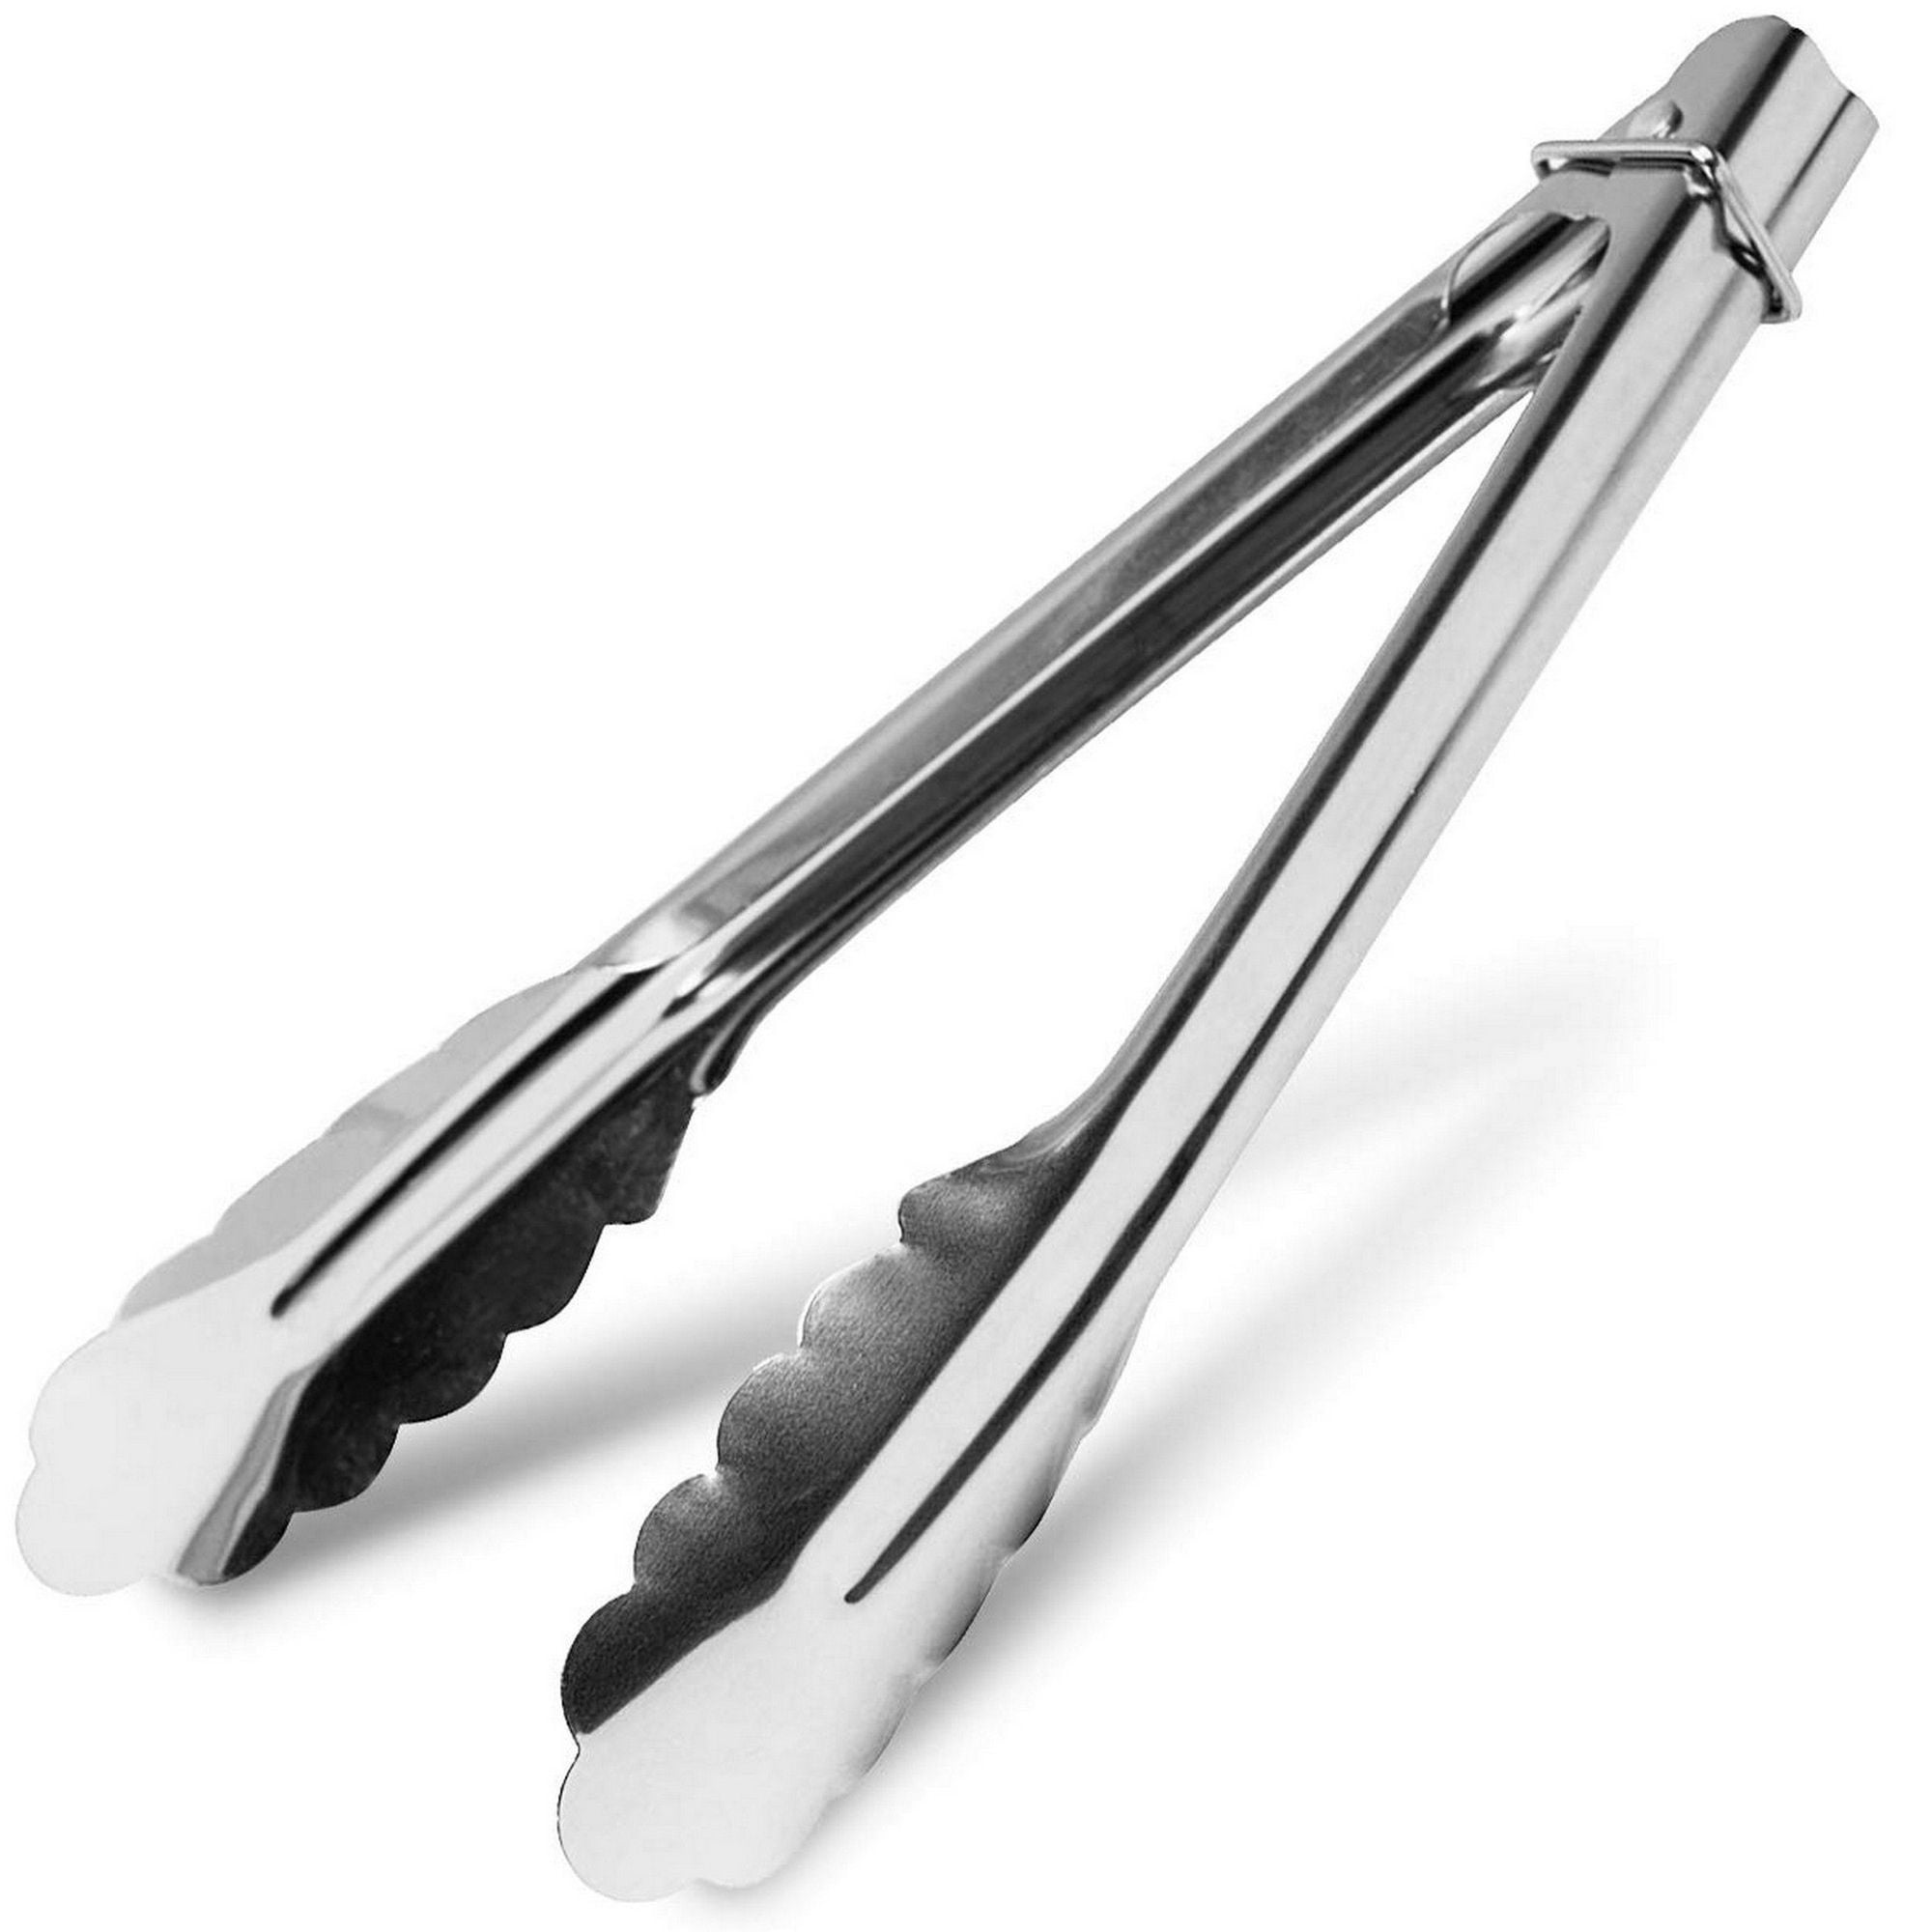 Stainless Steel Grill Tongs - 3-Pack Small Kitchen Bbq 9-Inch Grilling ...